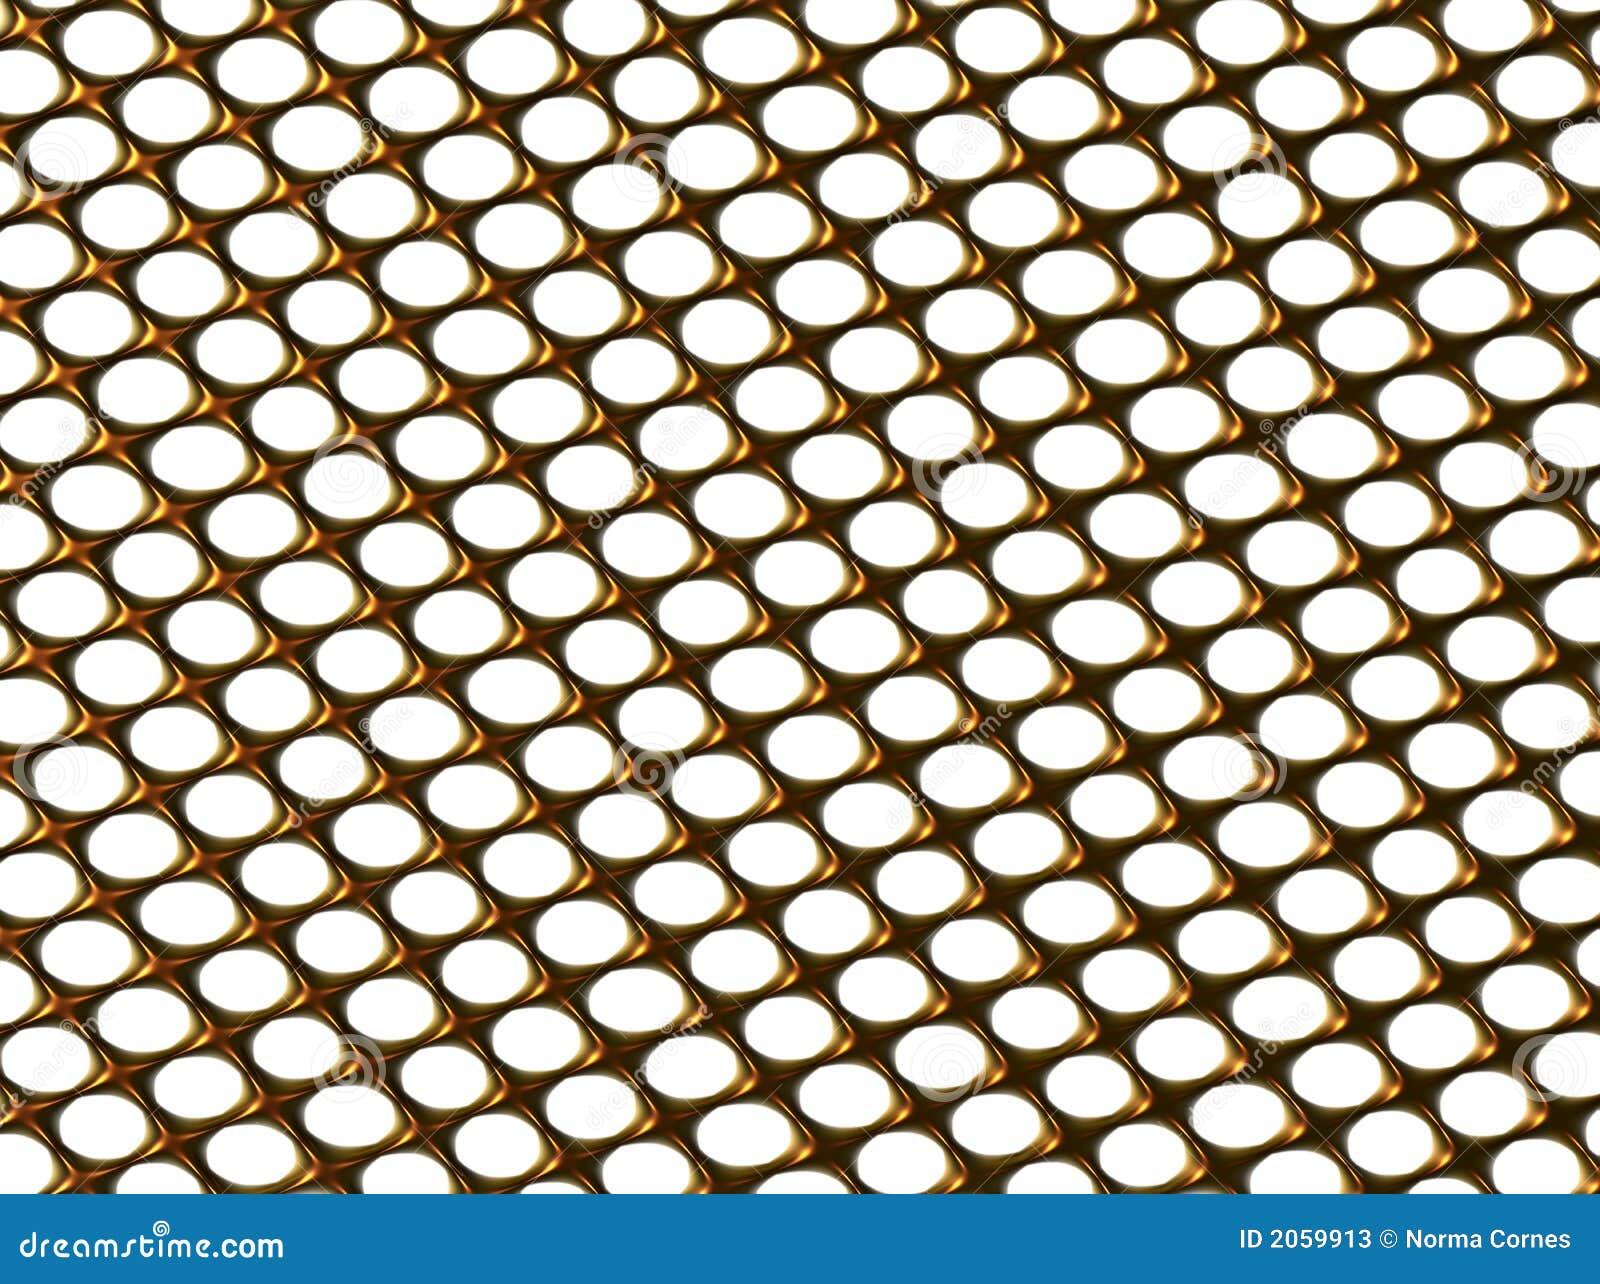 Wire mesh stock image. Image of golden, chrome, heavy - 2059913